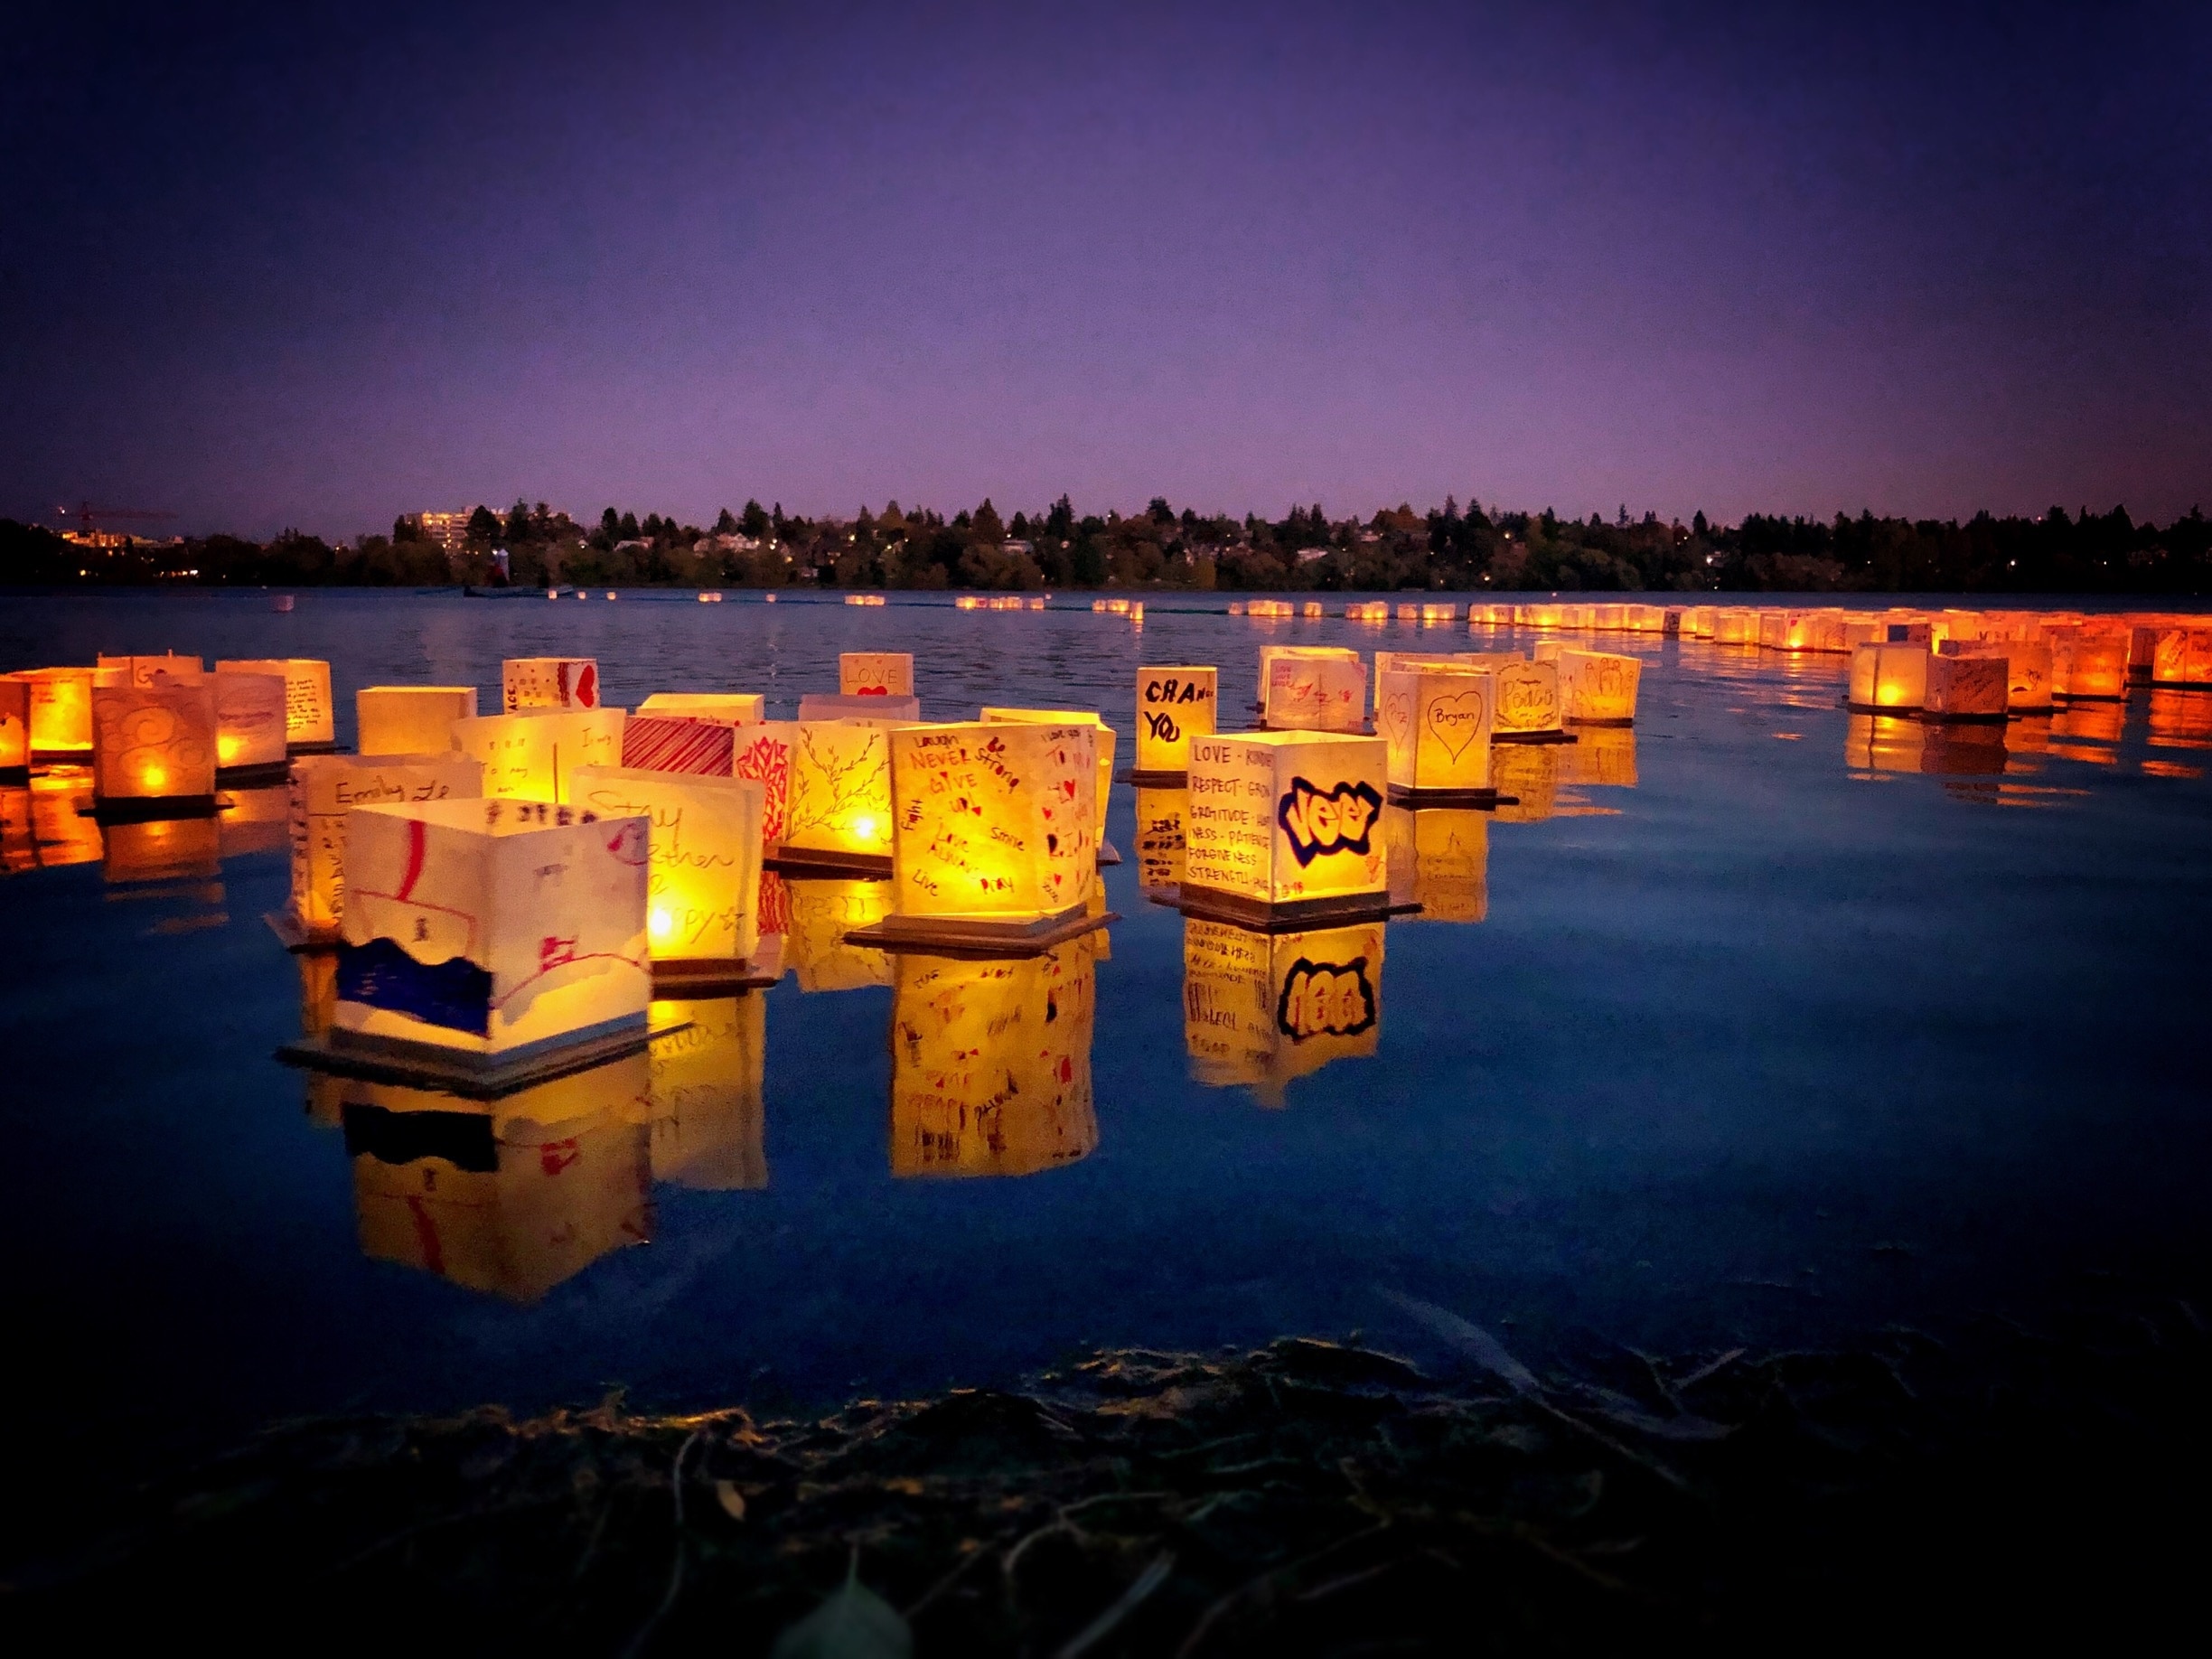 Seattle Water Lantern Festival at Green Lake Park.
It was surprising to see so many people showed up to make their own lanterns filled with meaningful personal messages...
#TroveOnTuesday